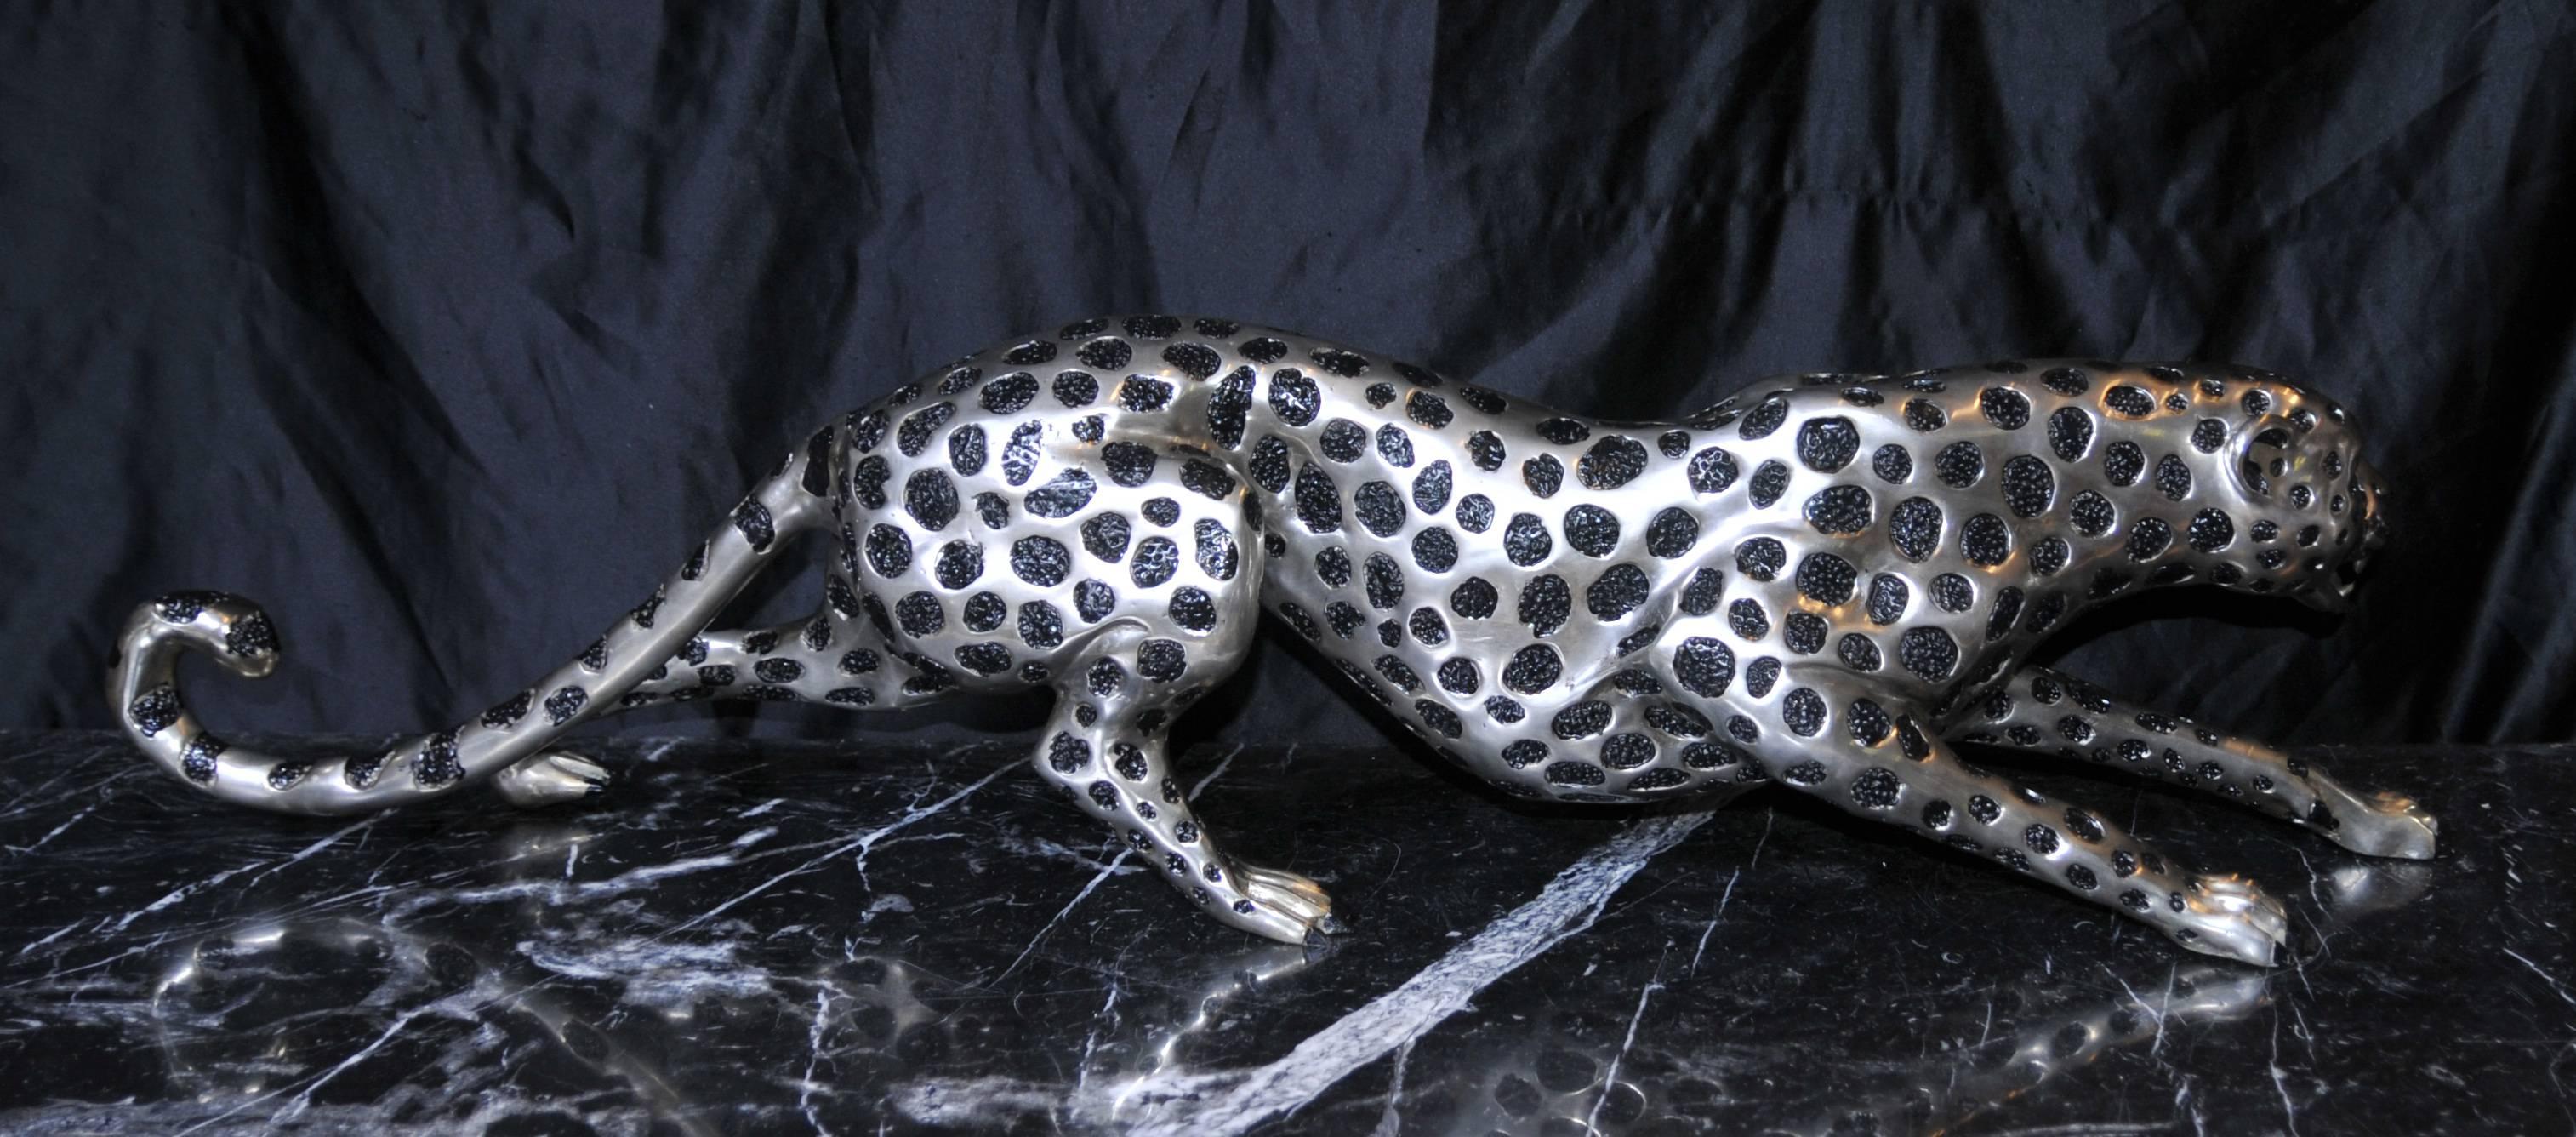 Large silver bronze art deco style casting of a cheetah.
Piece is almost four feet long so large.
Really elegant piece, long and feline, sloping across the floor.
Every designers dream and a great collectors piece.
Fantastic patina to